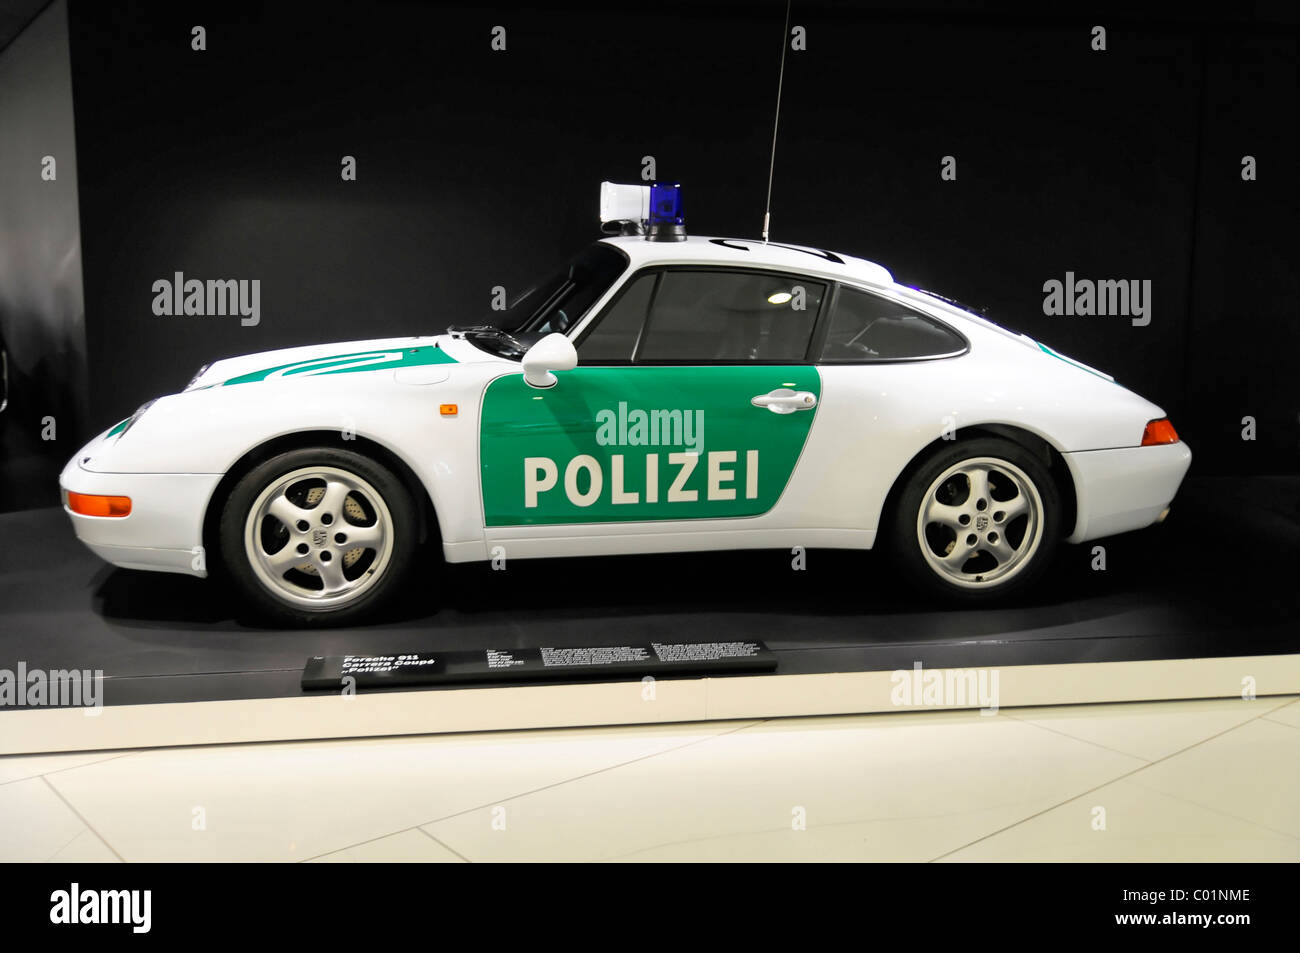 Police Car Stuttgart Germany High Resolution Stock Photography and Images -  Alamy